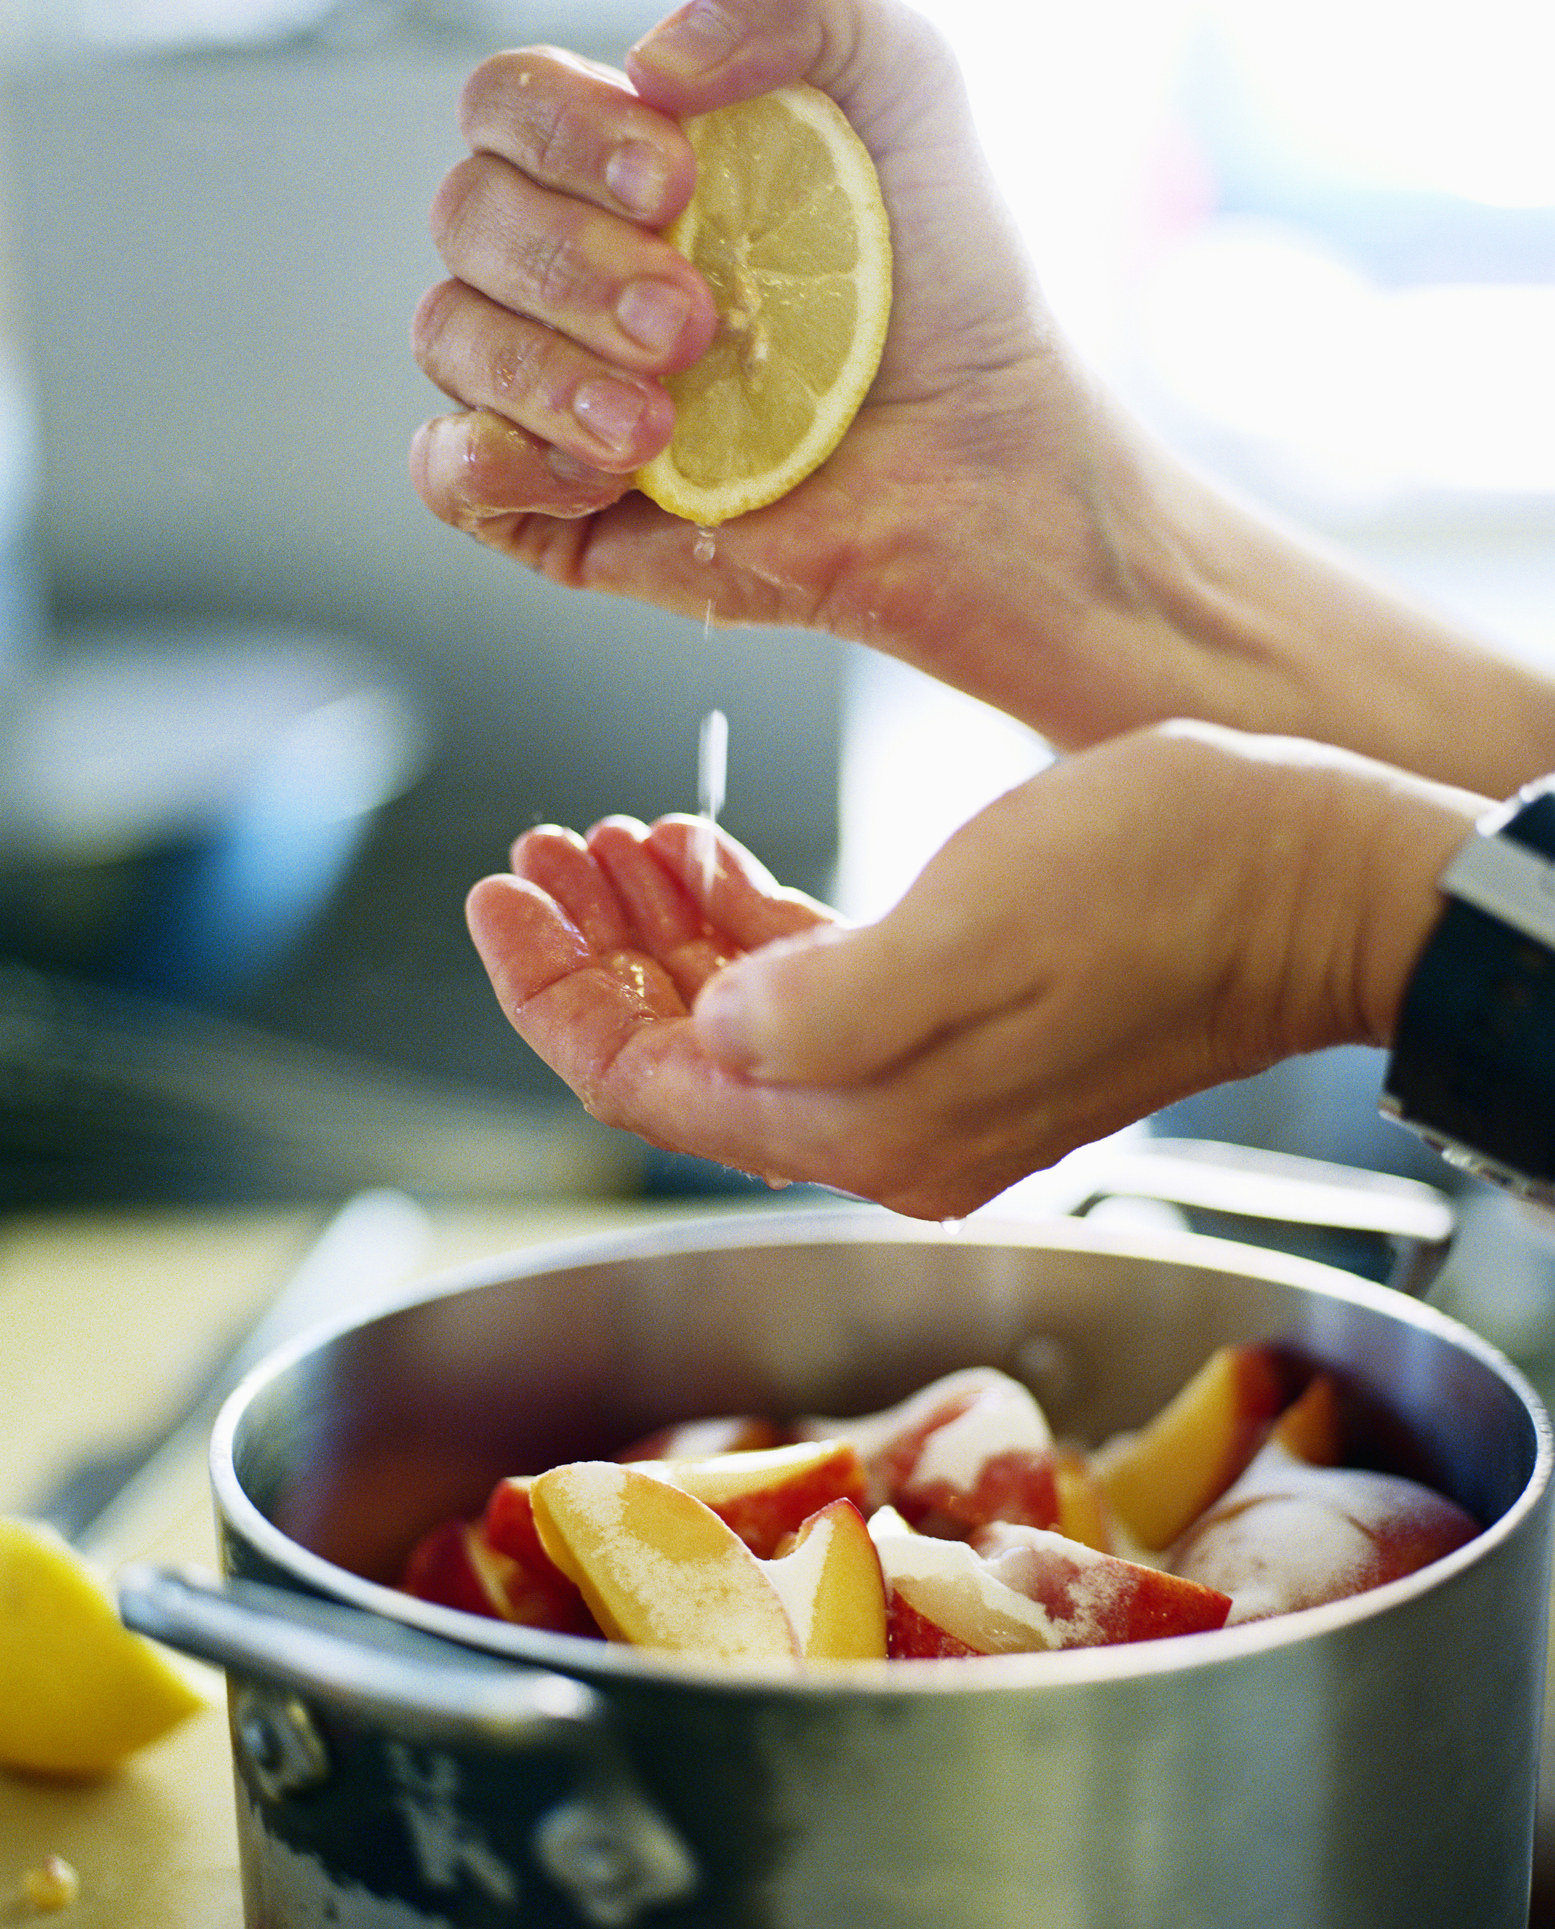 Lemon juice being squeezed into a big pot of food